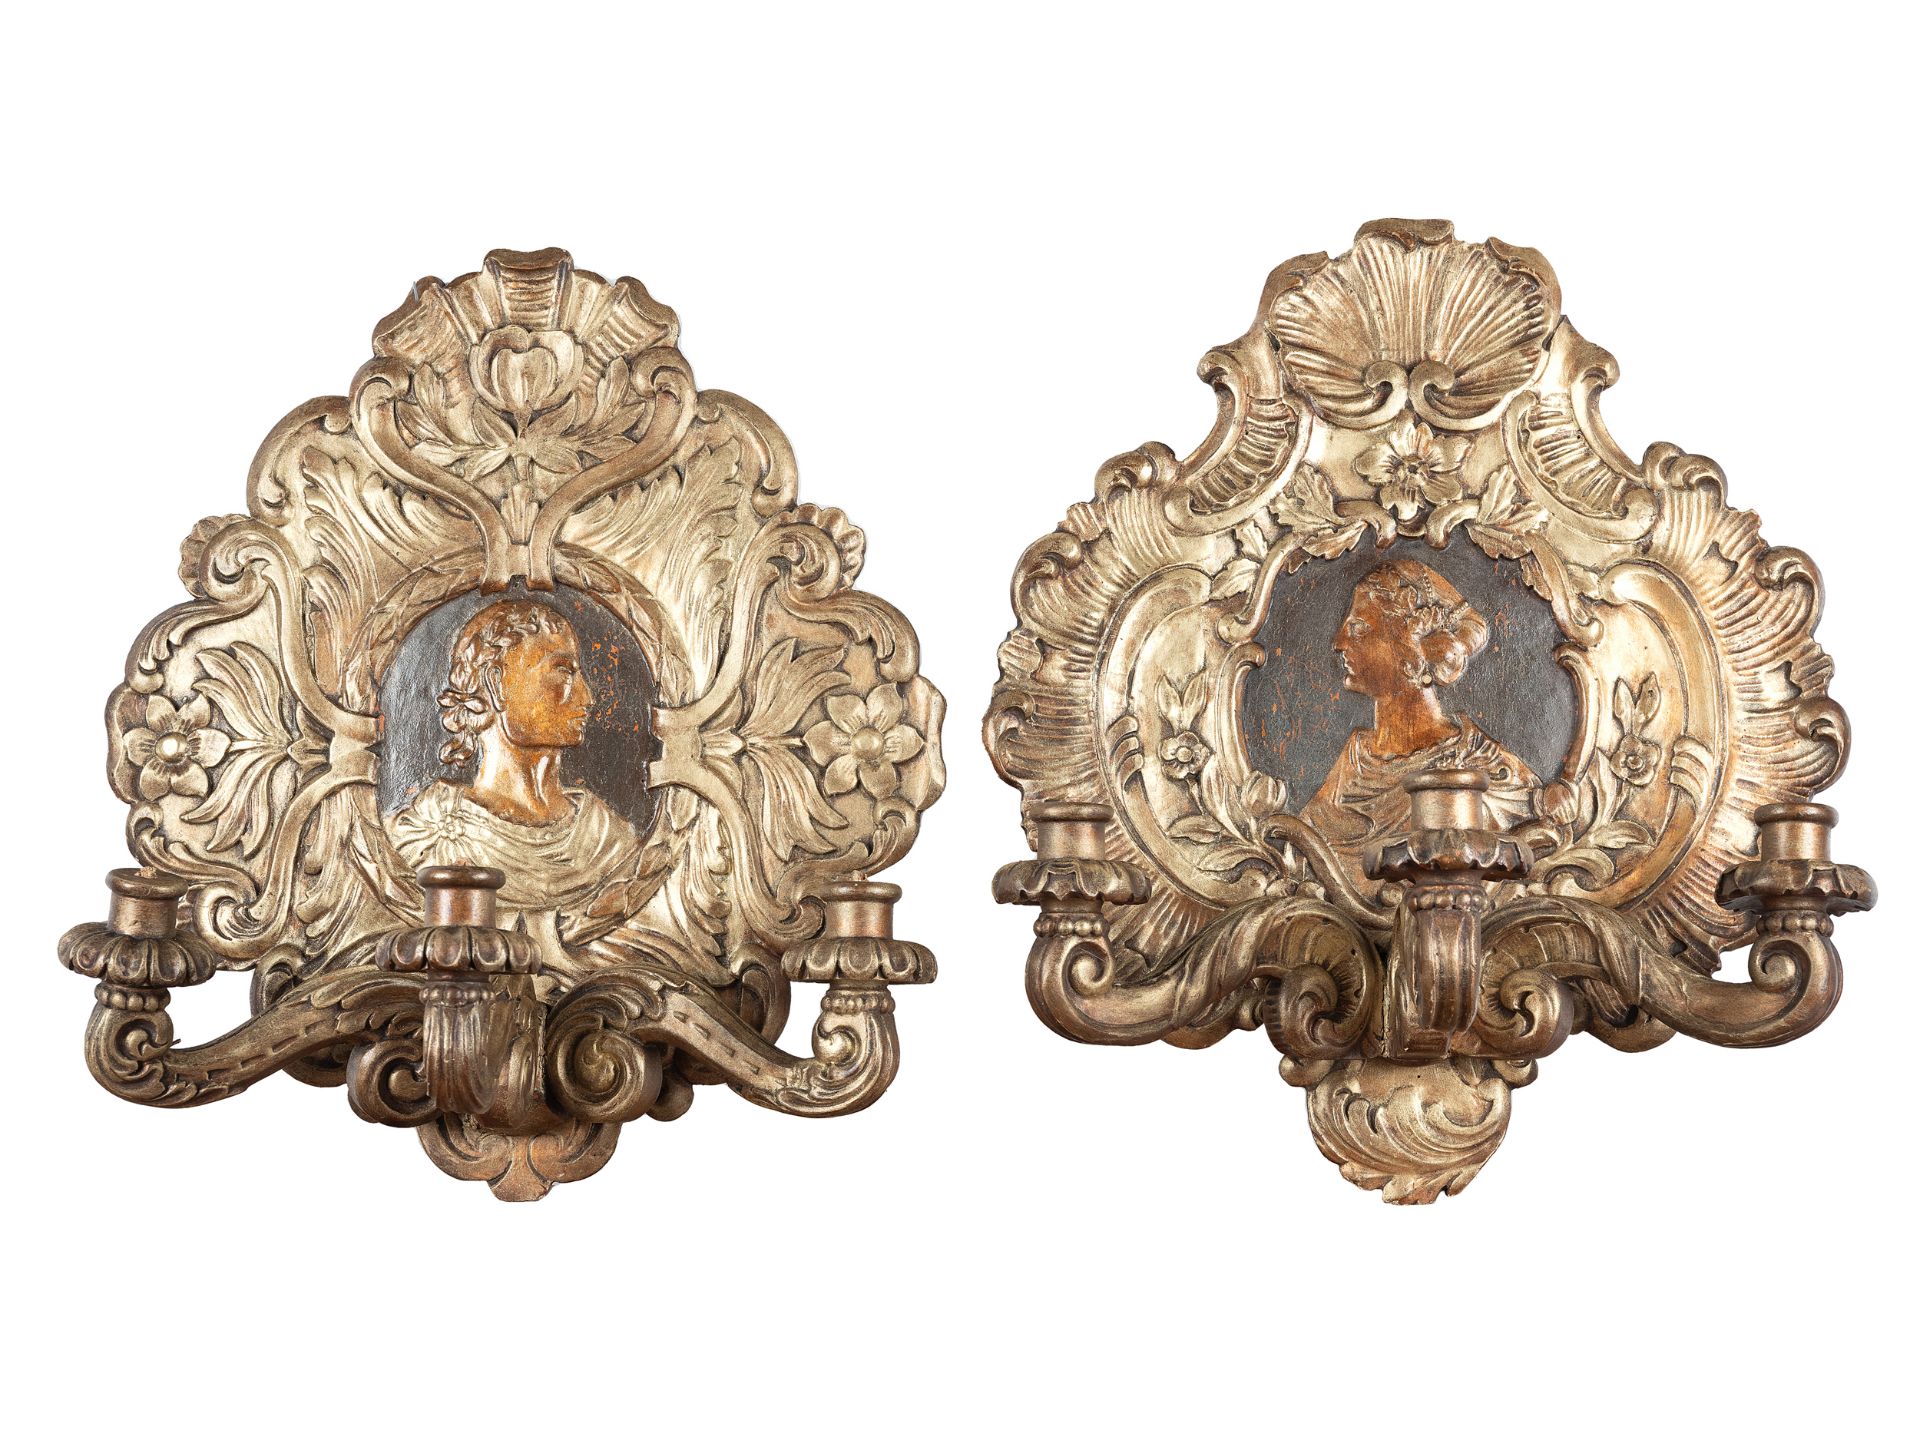 Pair of chandelier appliques, Italy/Southern Germany, 18th century